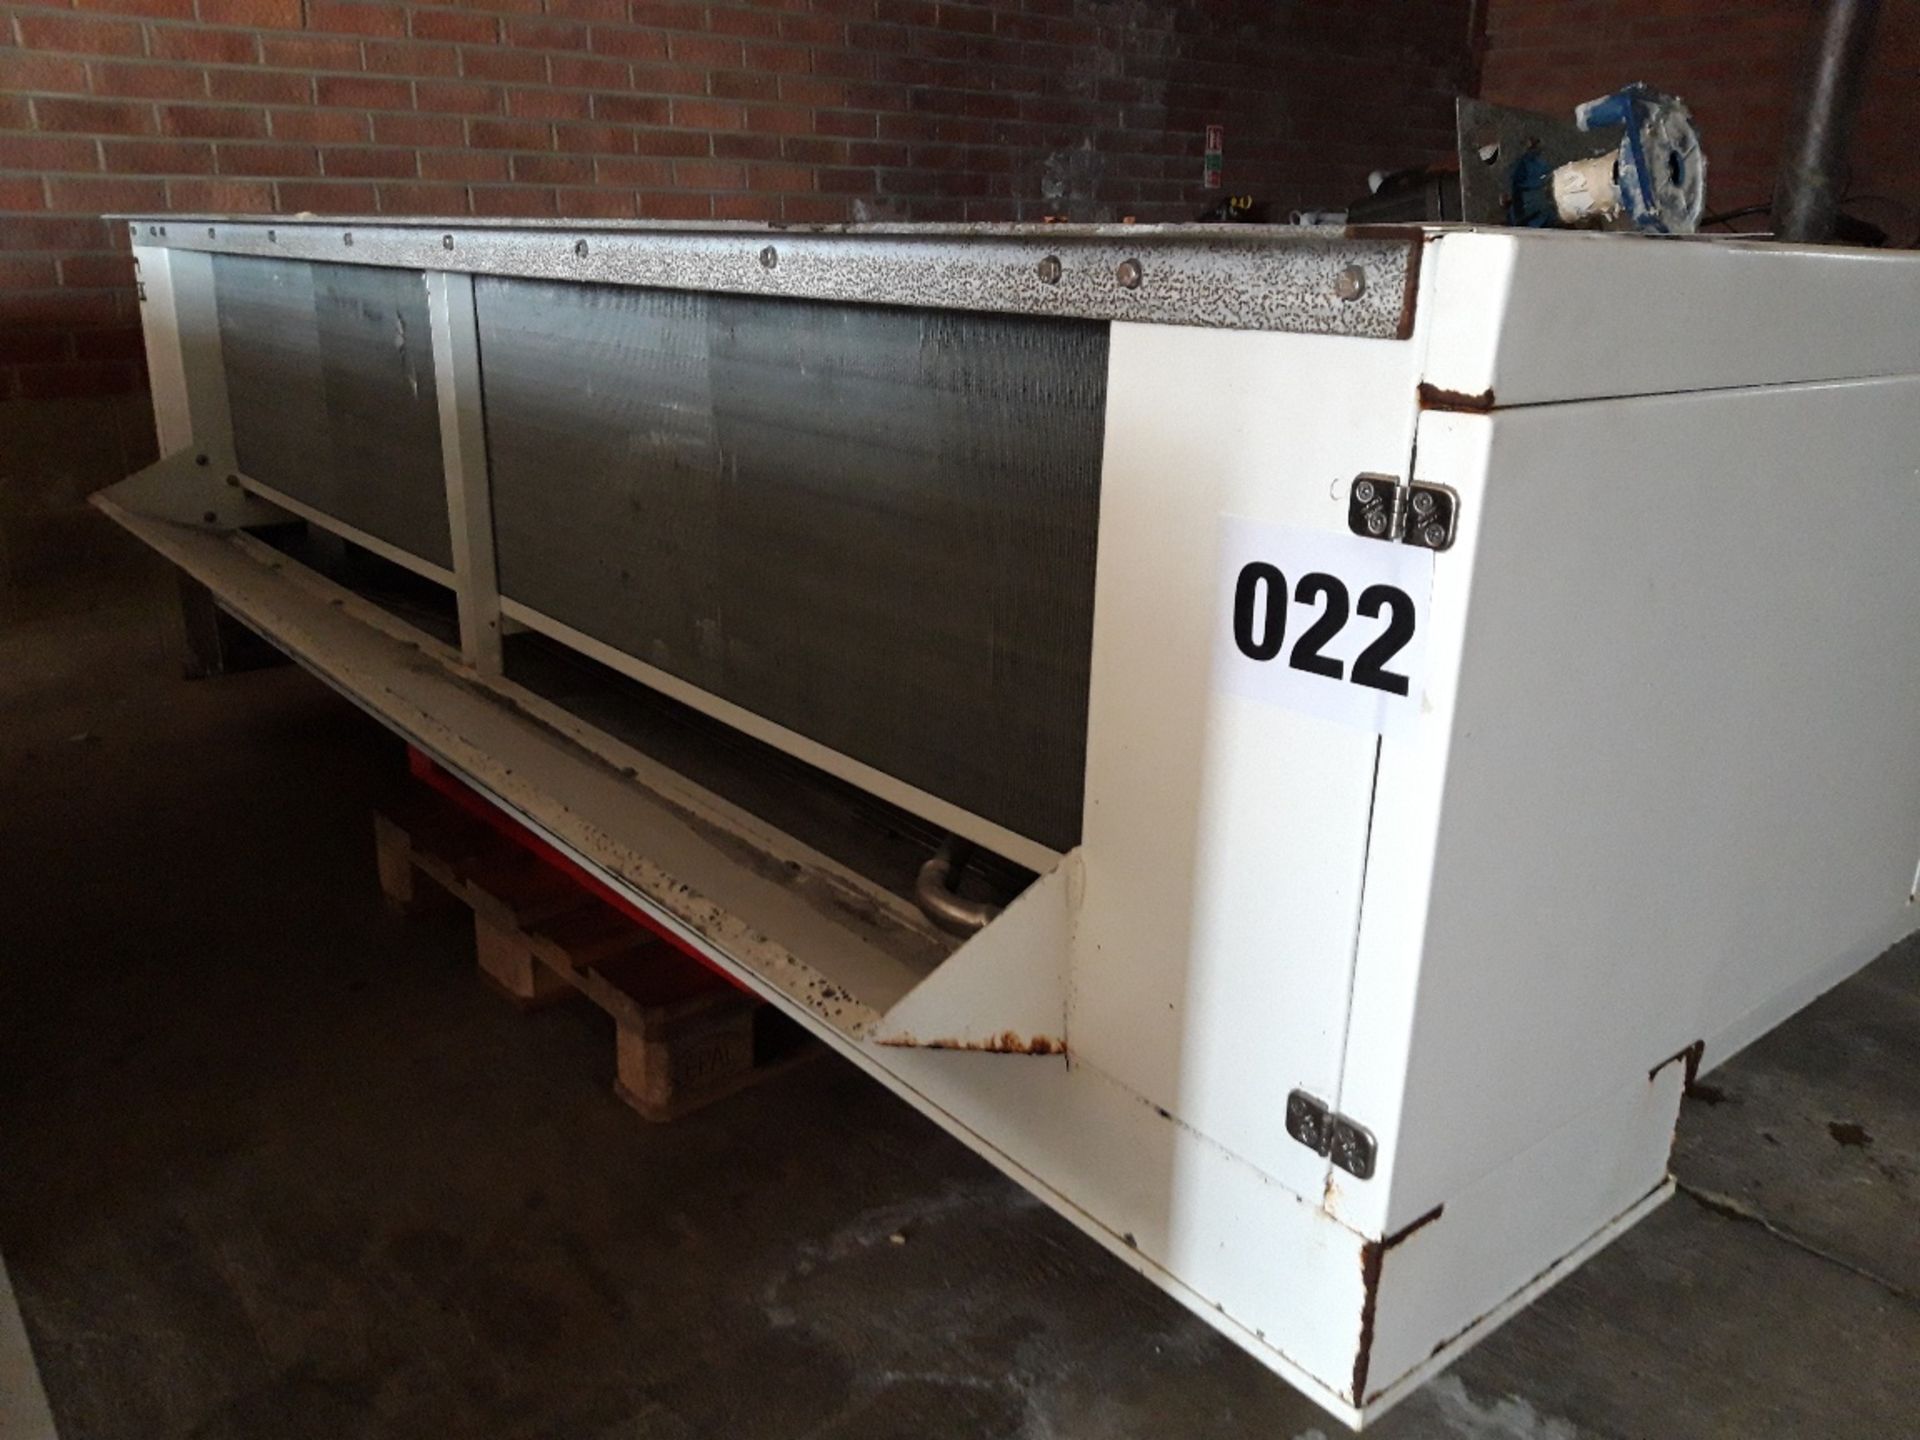 Evaporator Model DDL 6 - 60 by Heating + Cooling Coils. Lift out £80 was working in factory .